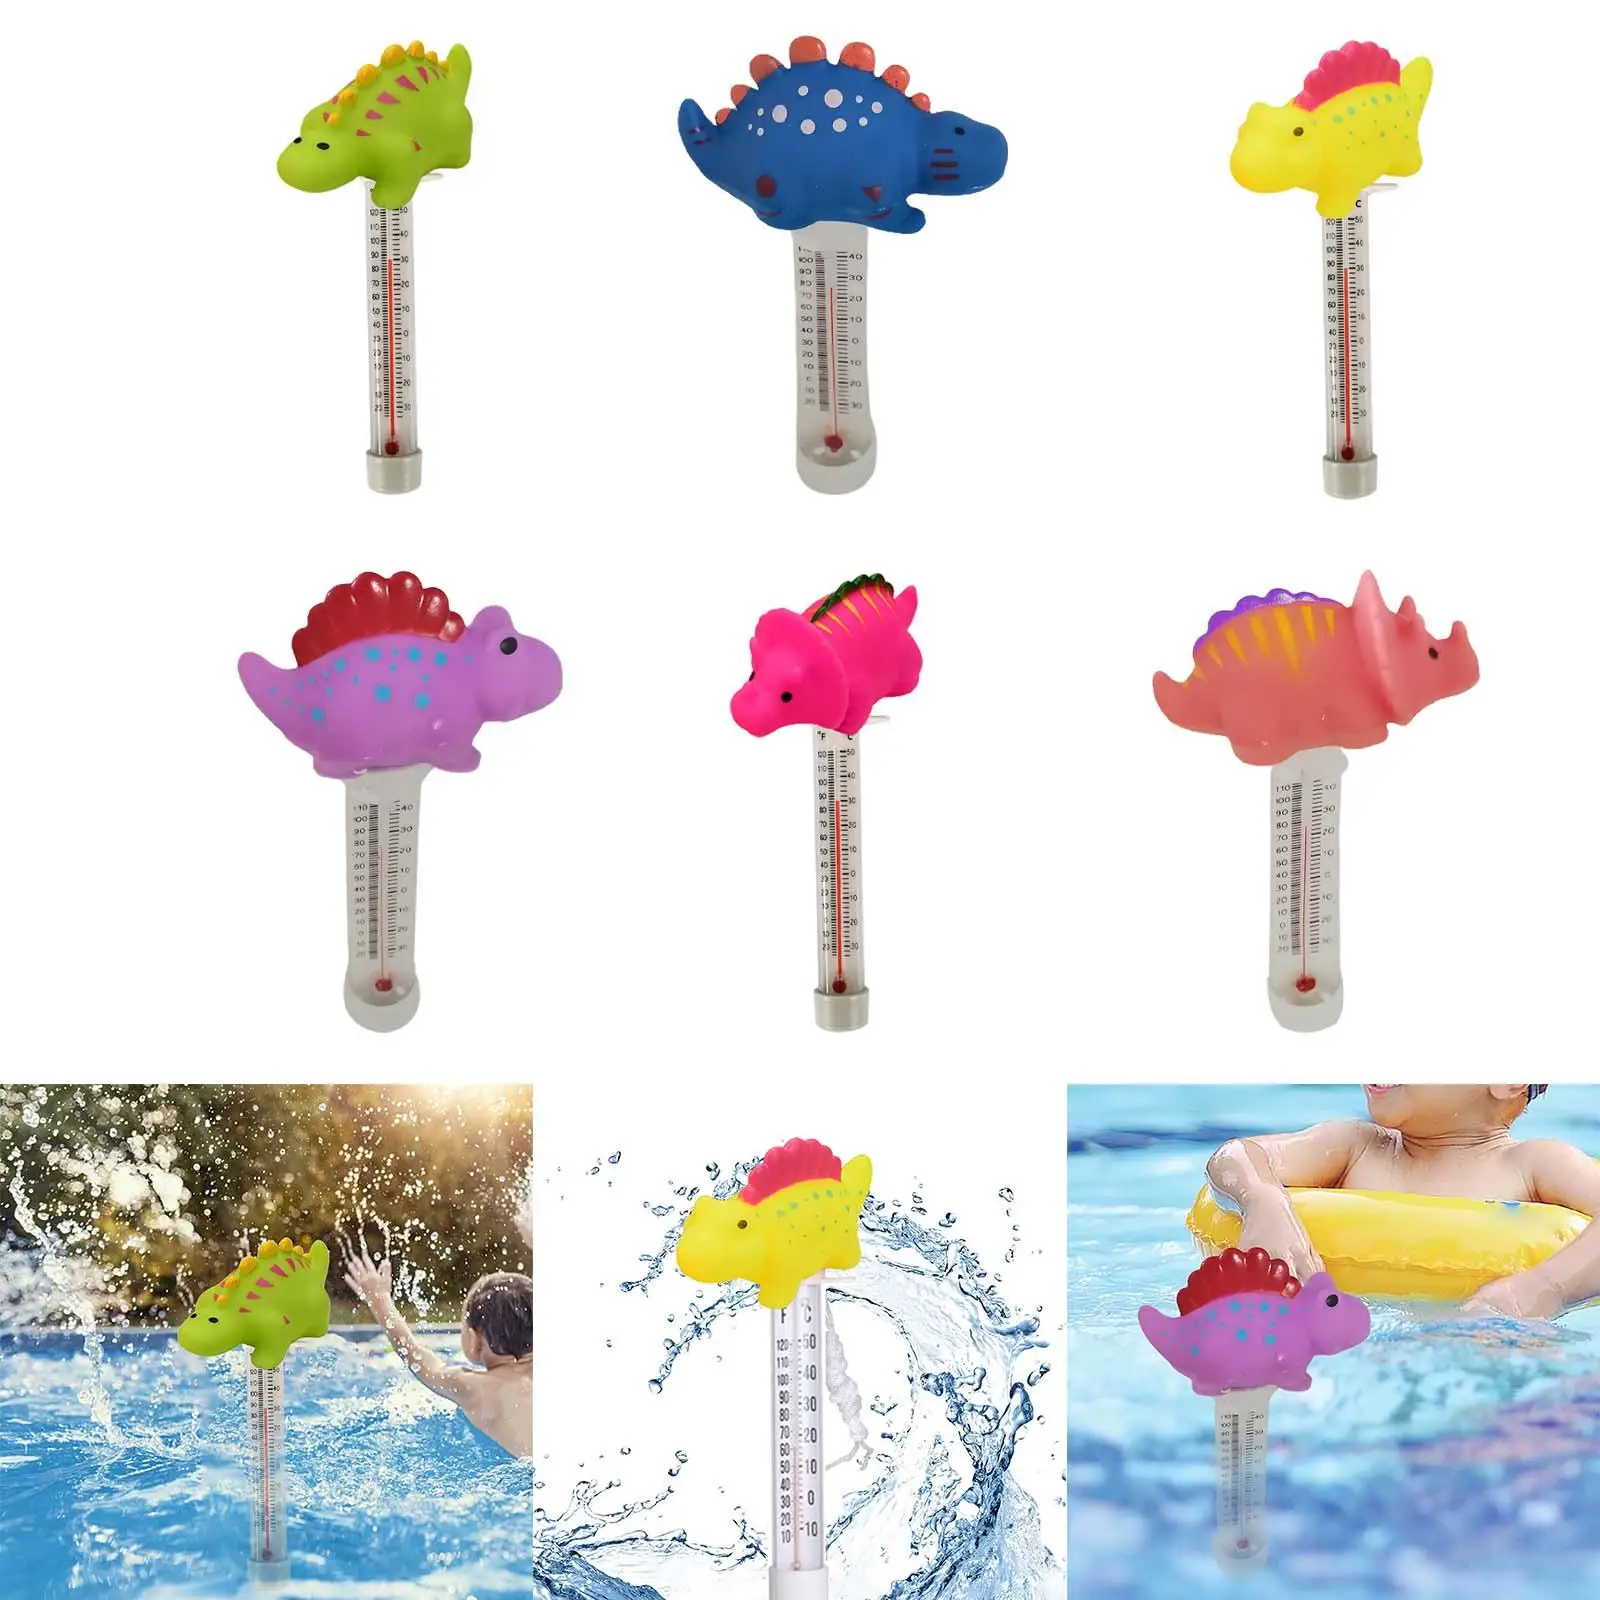 

Floating Swimming Pool Thermometer Shatter Resistant Easy Read with String Measurement for Bath Hot Tub Swimming Pool Ponds SPA